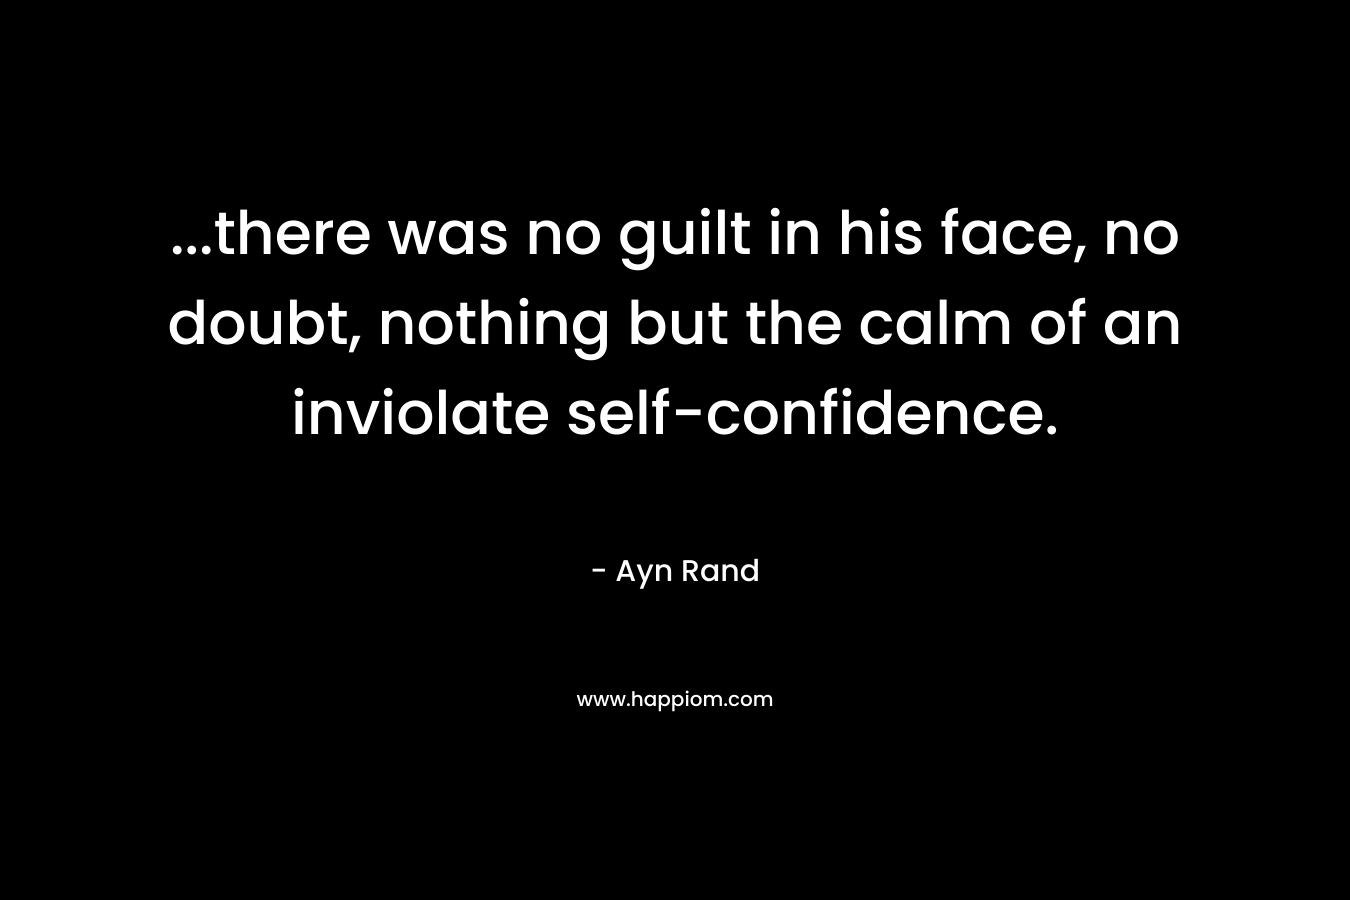 …there was no guilt in his face, no doubt, nothing but the calm of an inviolate self-confidence. – Ayn Rand